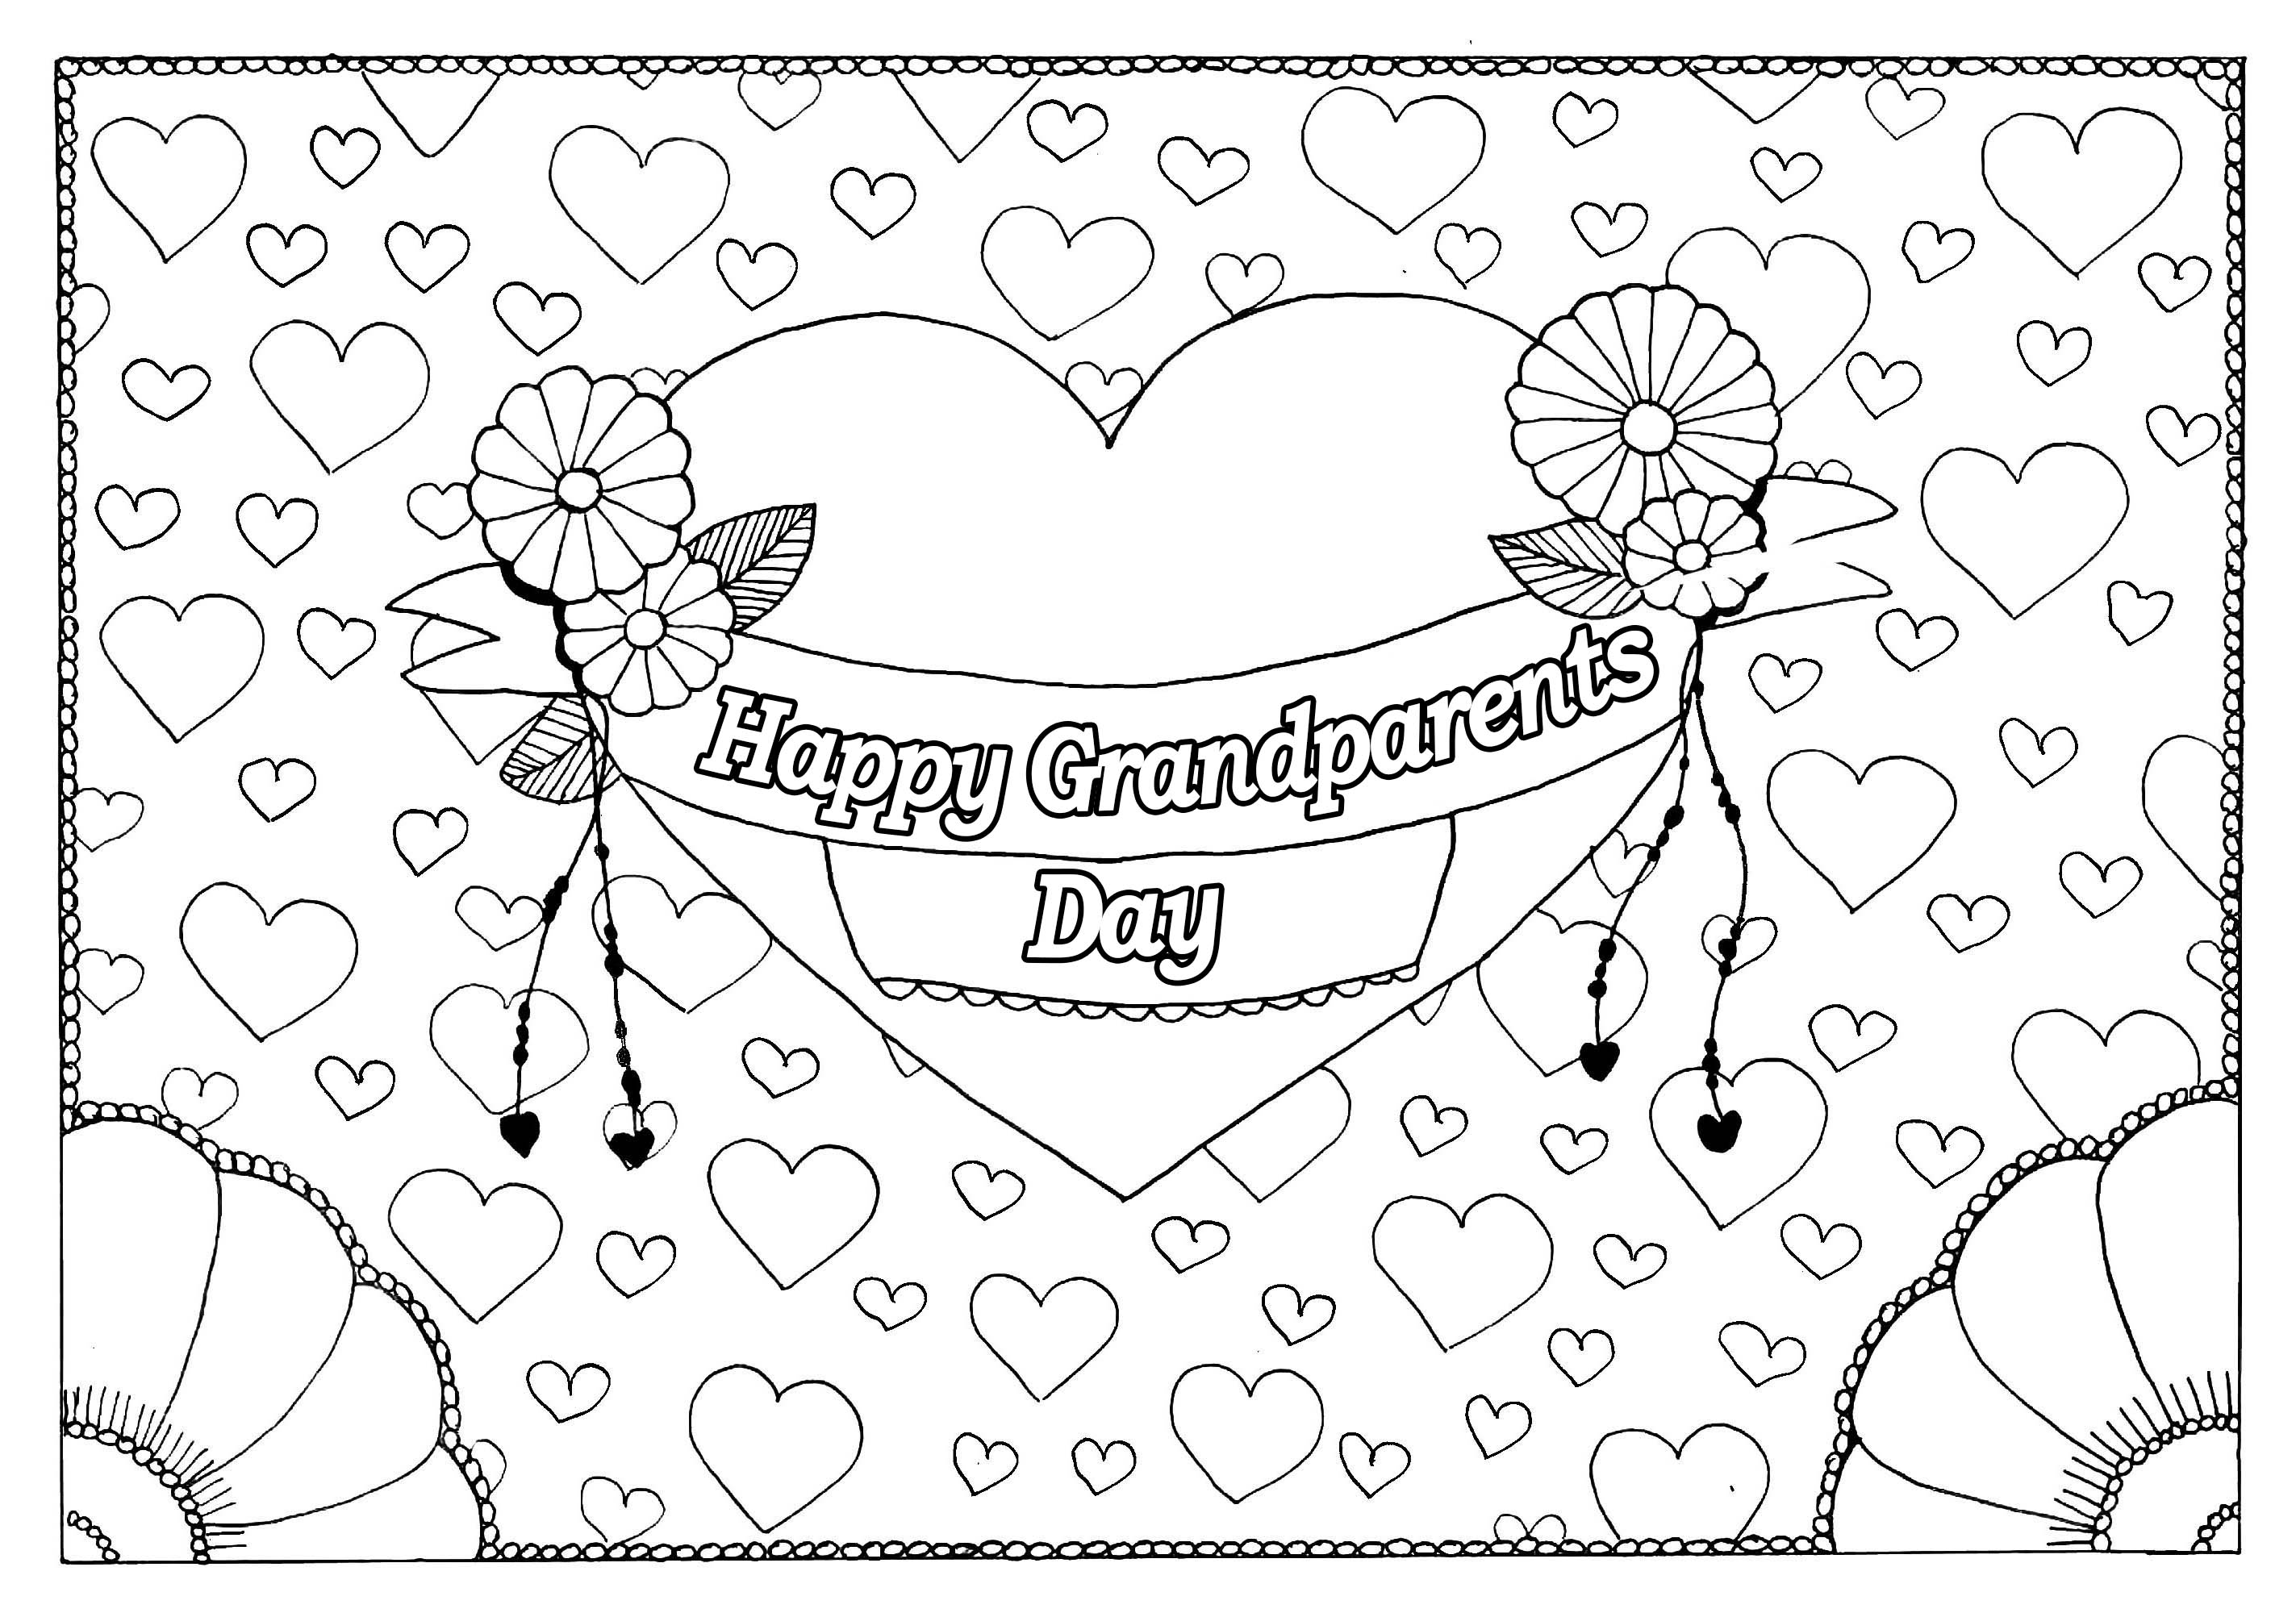 Grandparents day coloring page : Big & little hearts